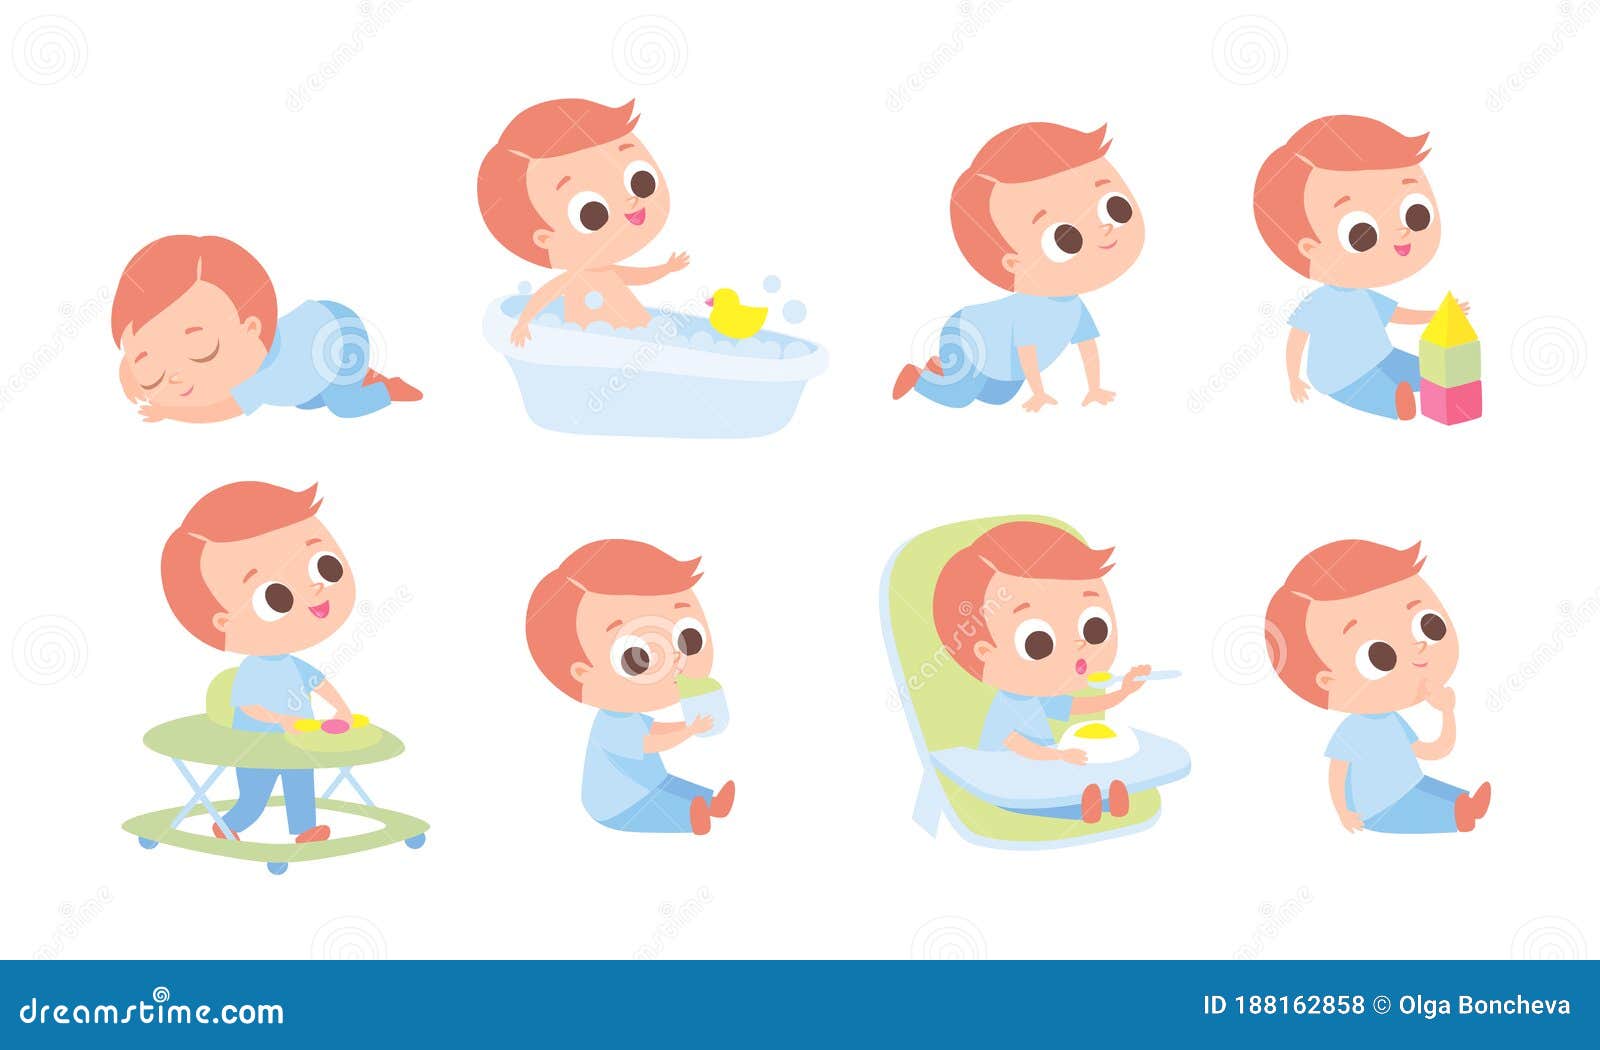 Baby Development, Baby Growth Stages Stock Vector - Illustration of ...